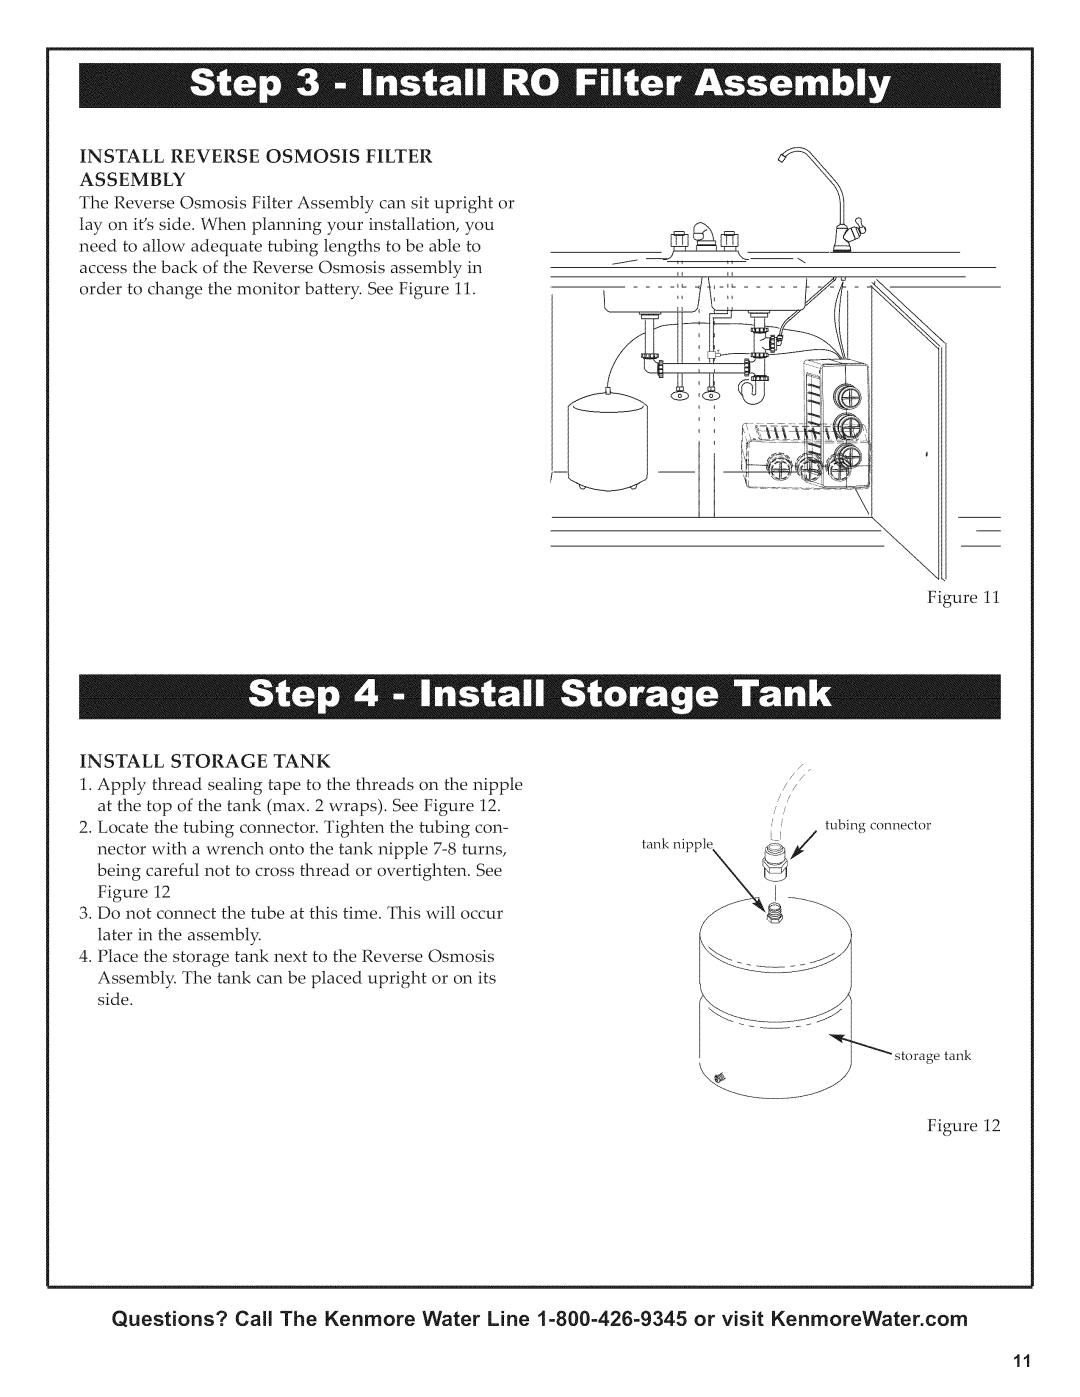 Kenmore 625.38556 owner manual tanknipp e, Assembly 